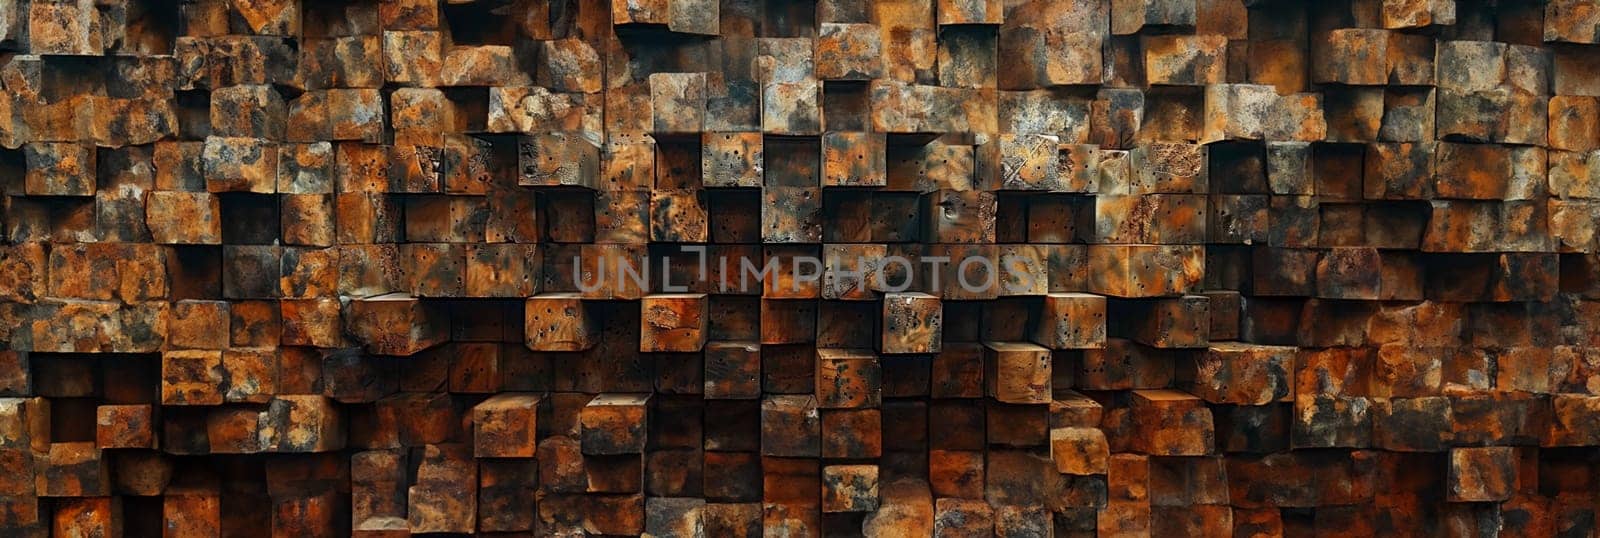 An abstract background composed of stacked, weathered wooden blocks in warm, earthy tones creating a textured, rustic pattern by sfinks